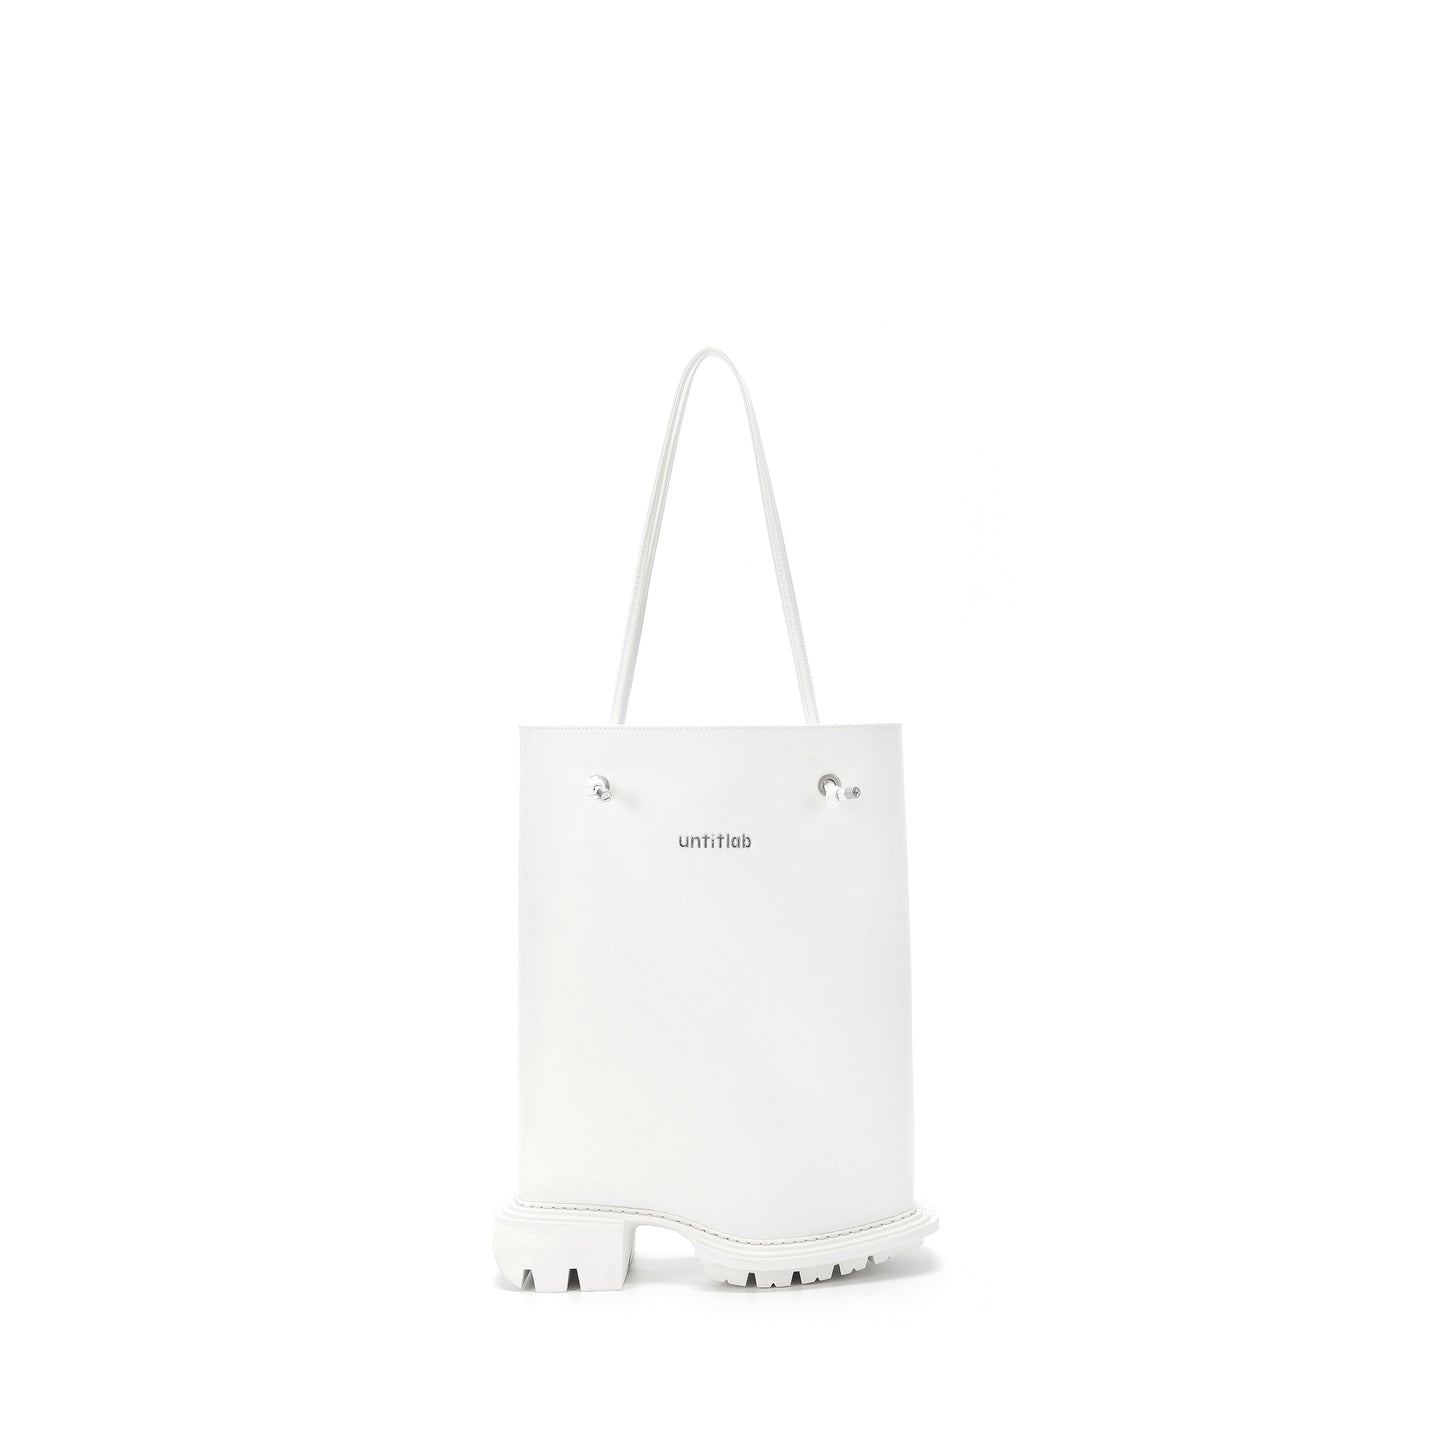 Reel Sole Tote Bag (White and Print)